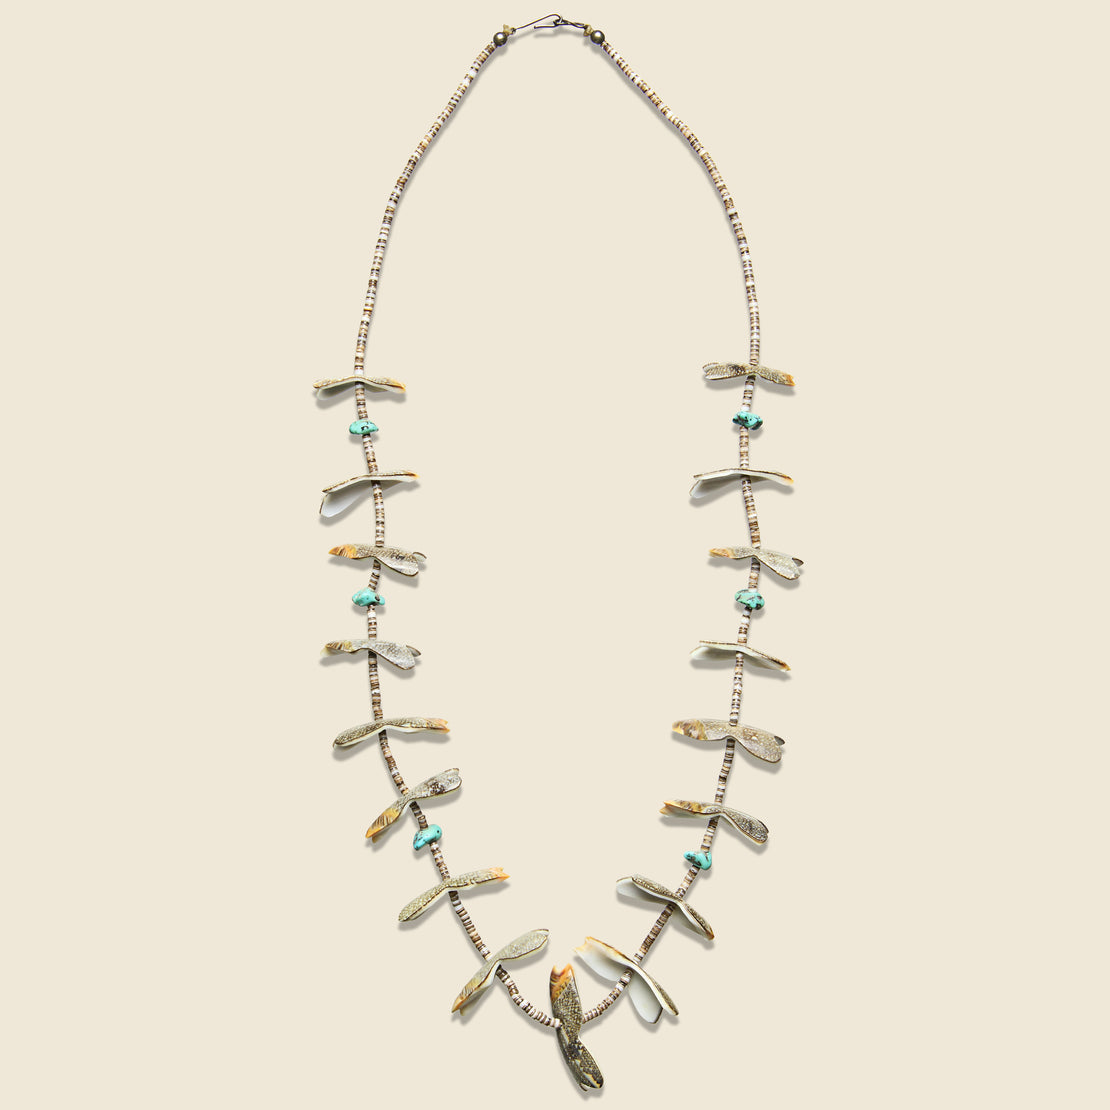 Vintage Nugget Shell & Turquoise Heishe Bead Fetish Necklace.